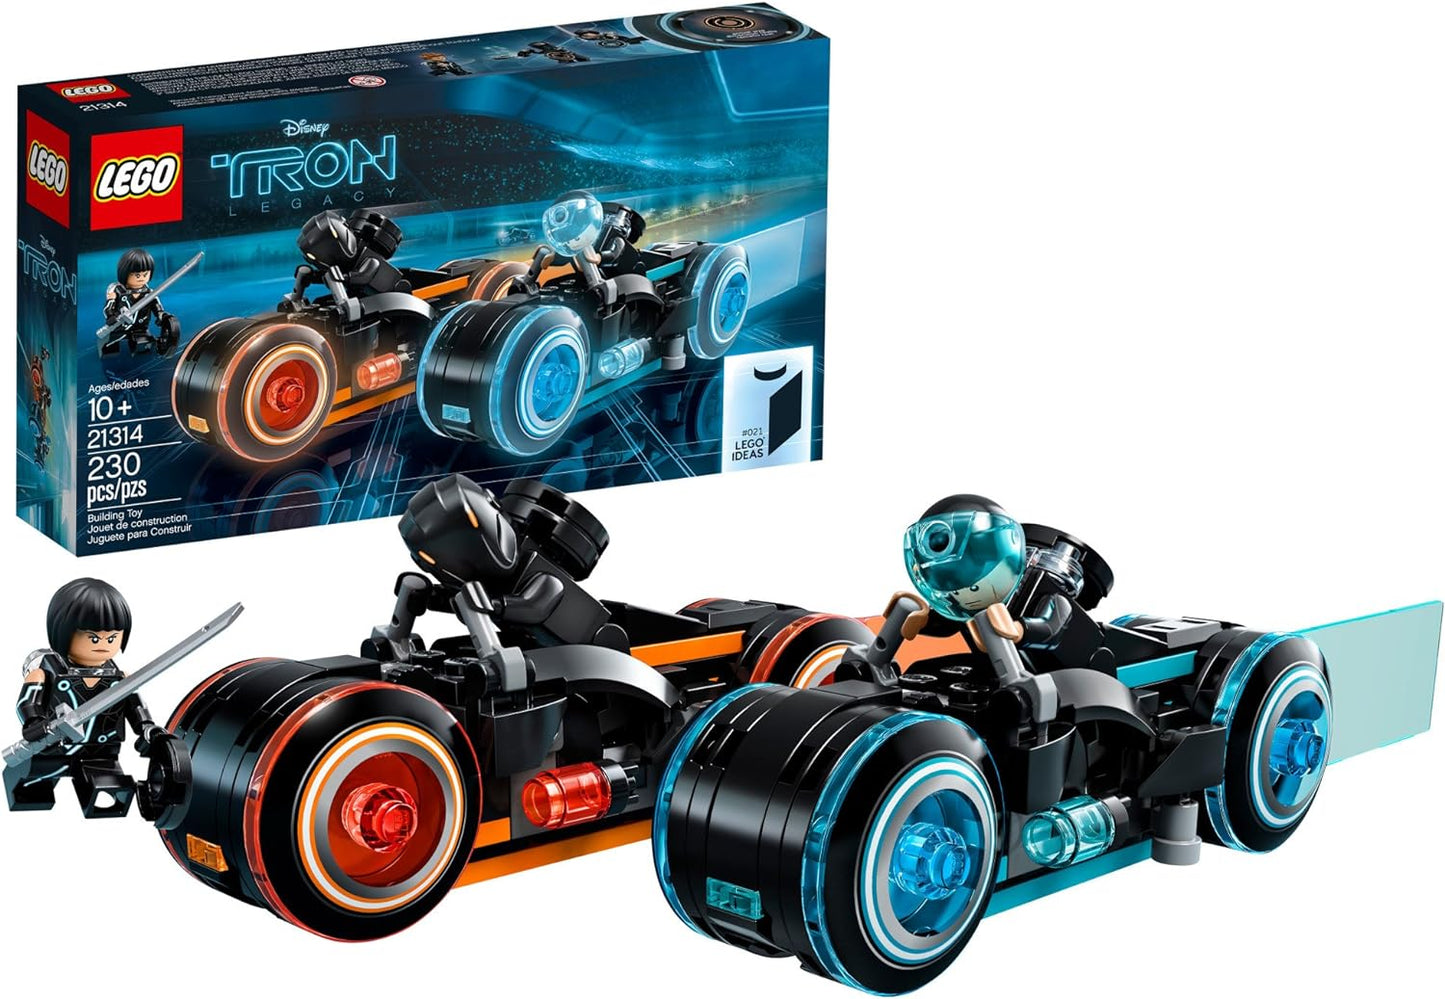 LEGO Ideas TRON: Legacy 21314 Construction Toy inspired by Disney’s TRON: Legacy movie (230 Pieces)